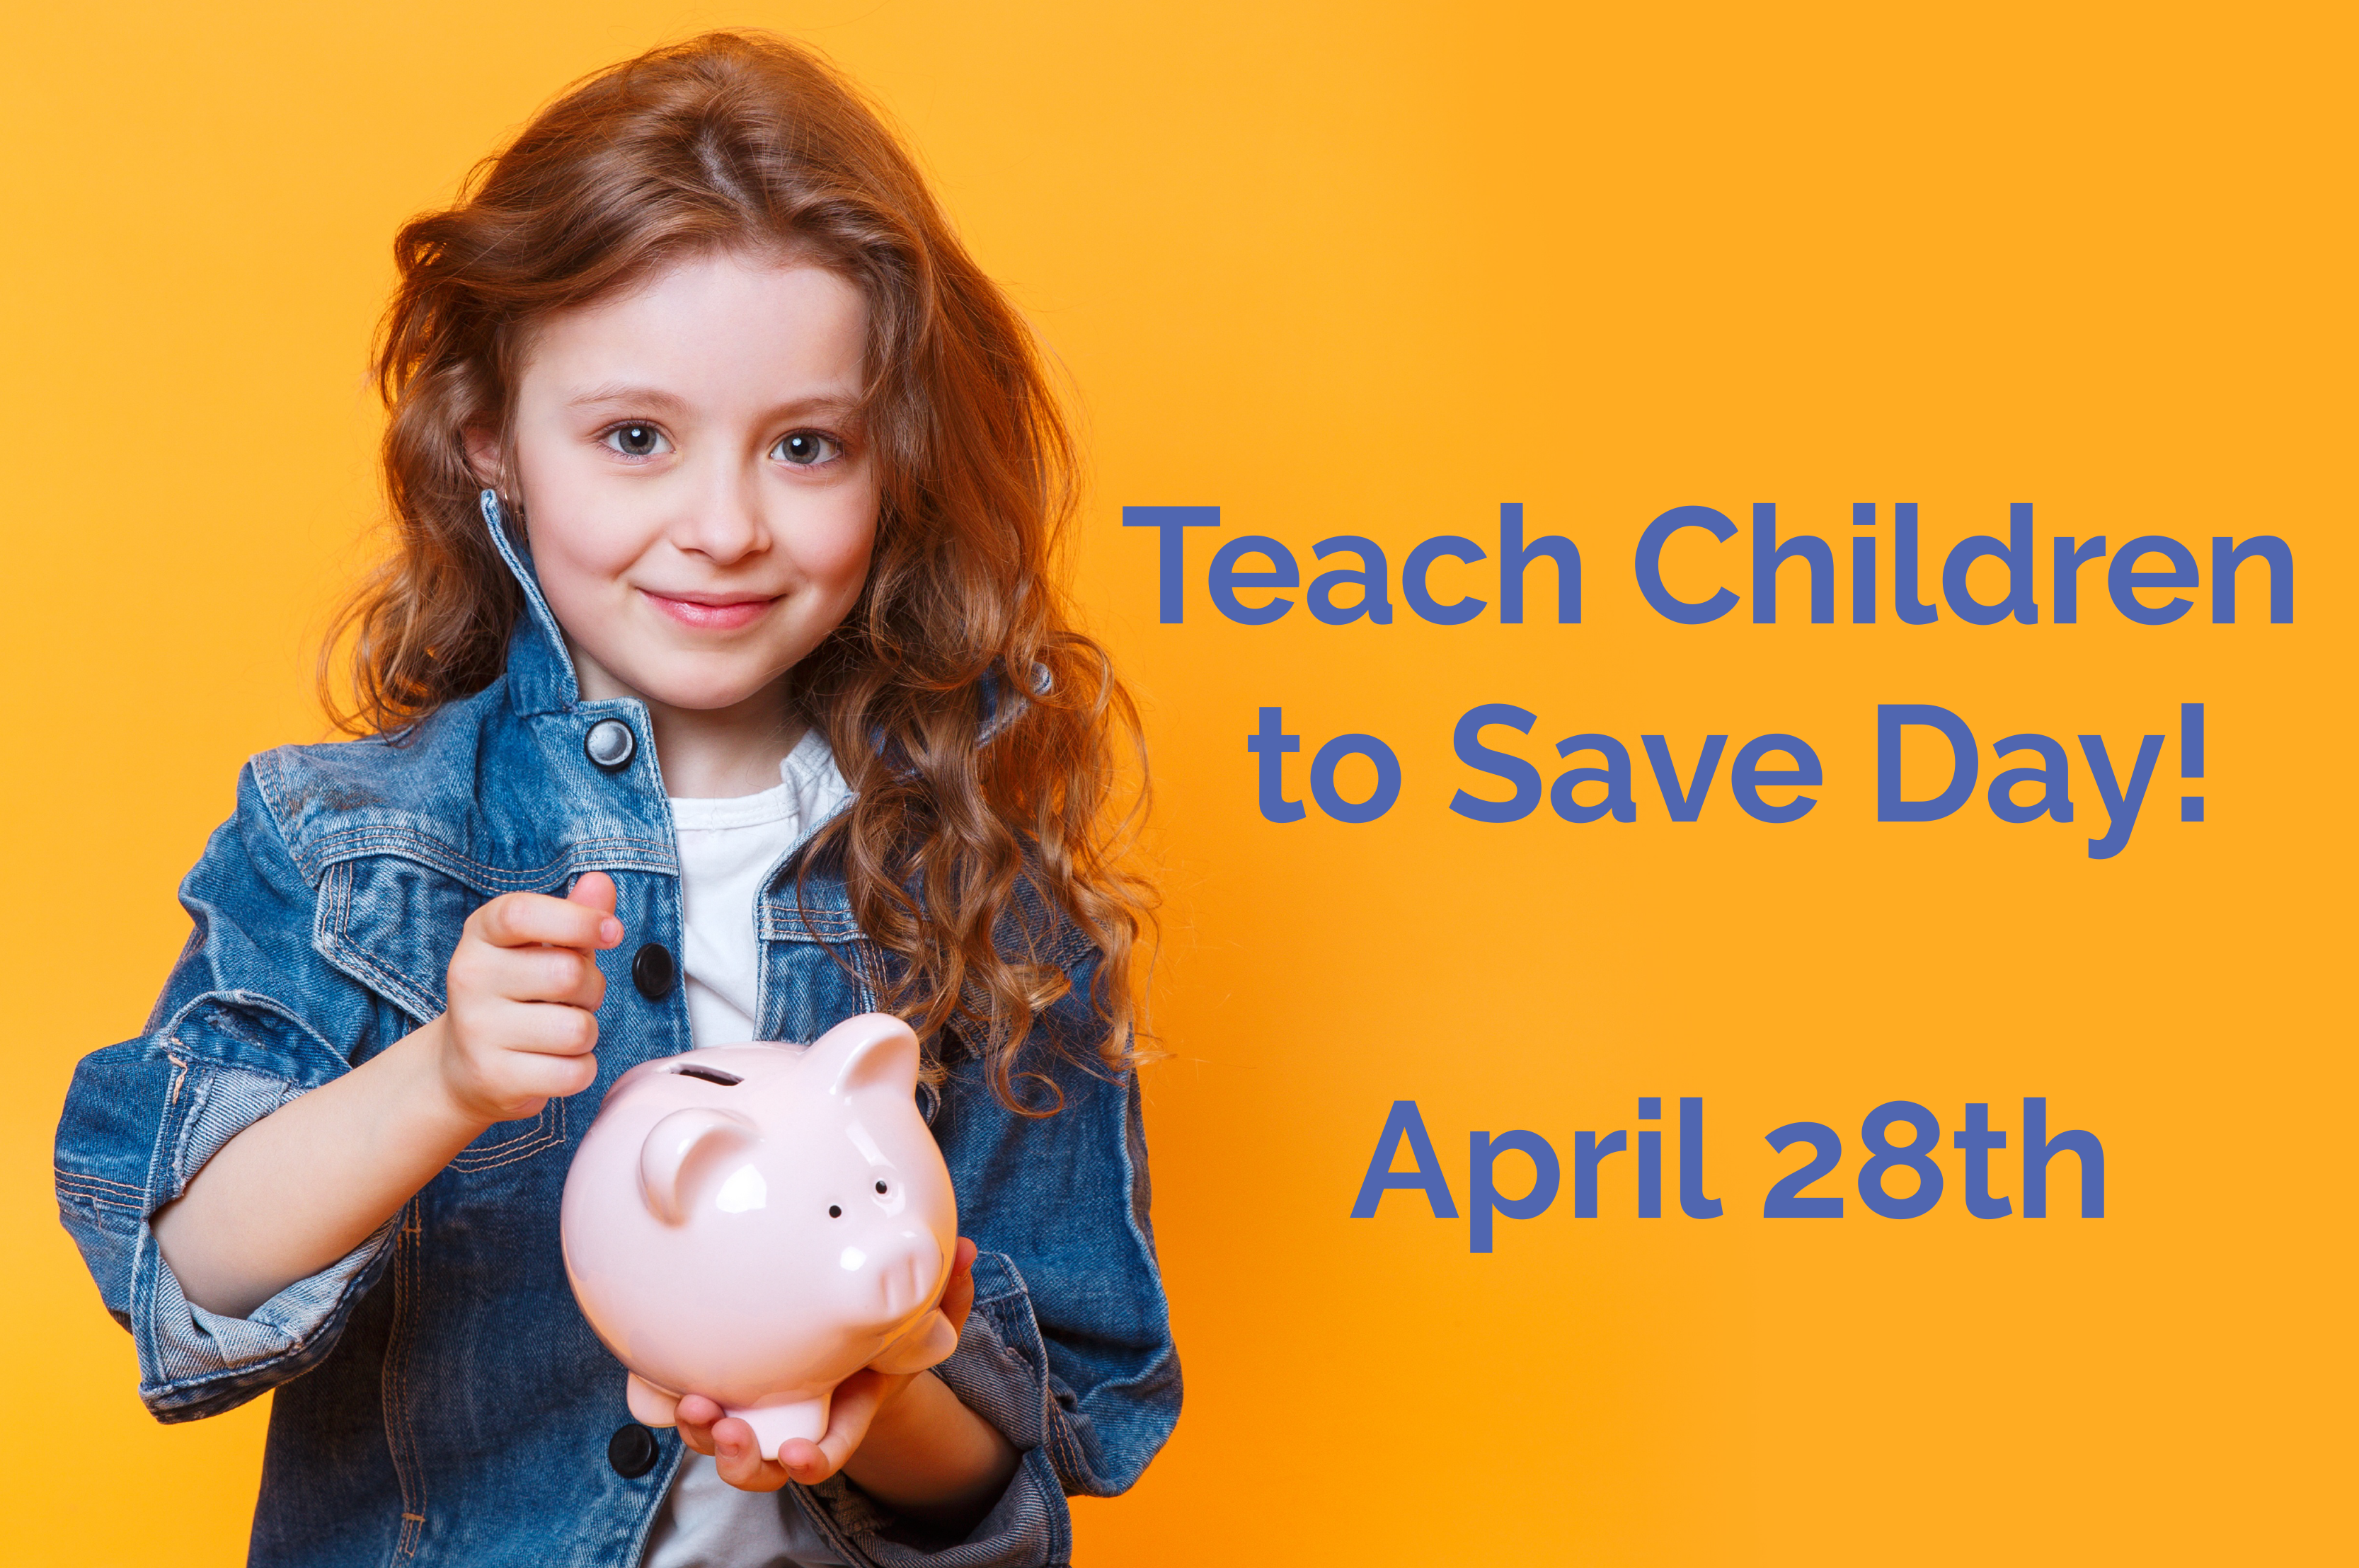 Teach Children to Save Day is April 28th